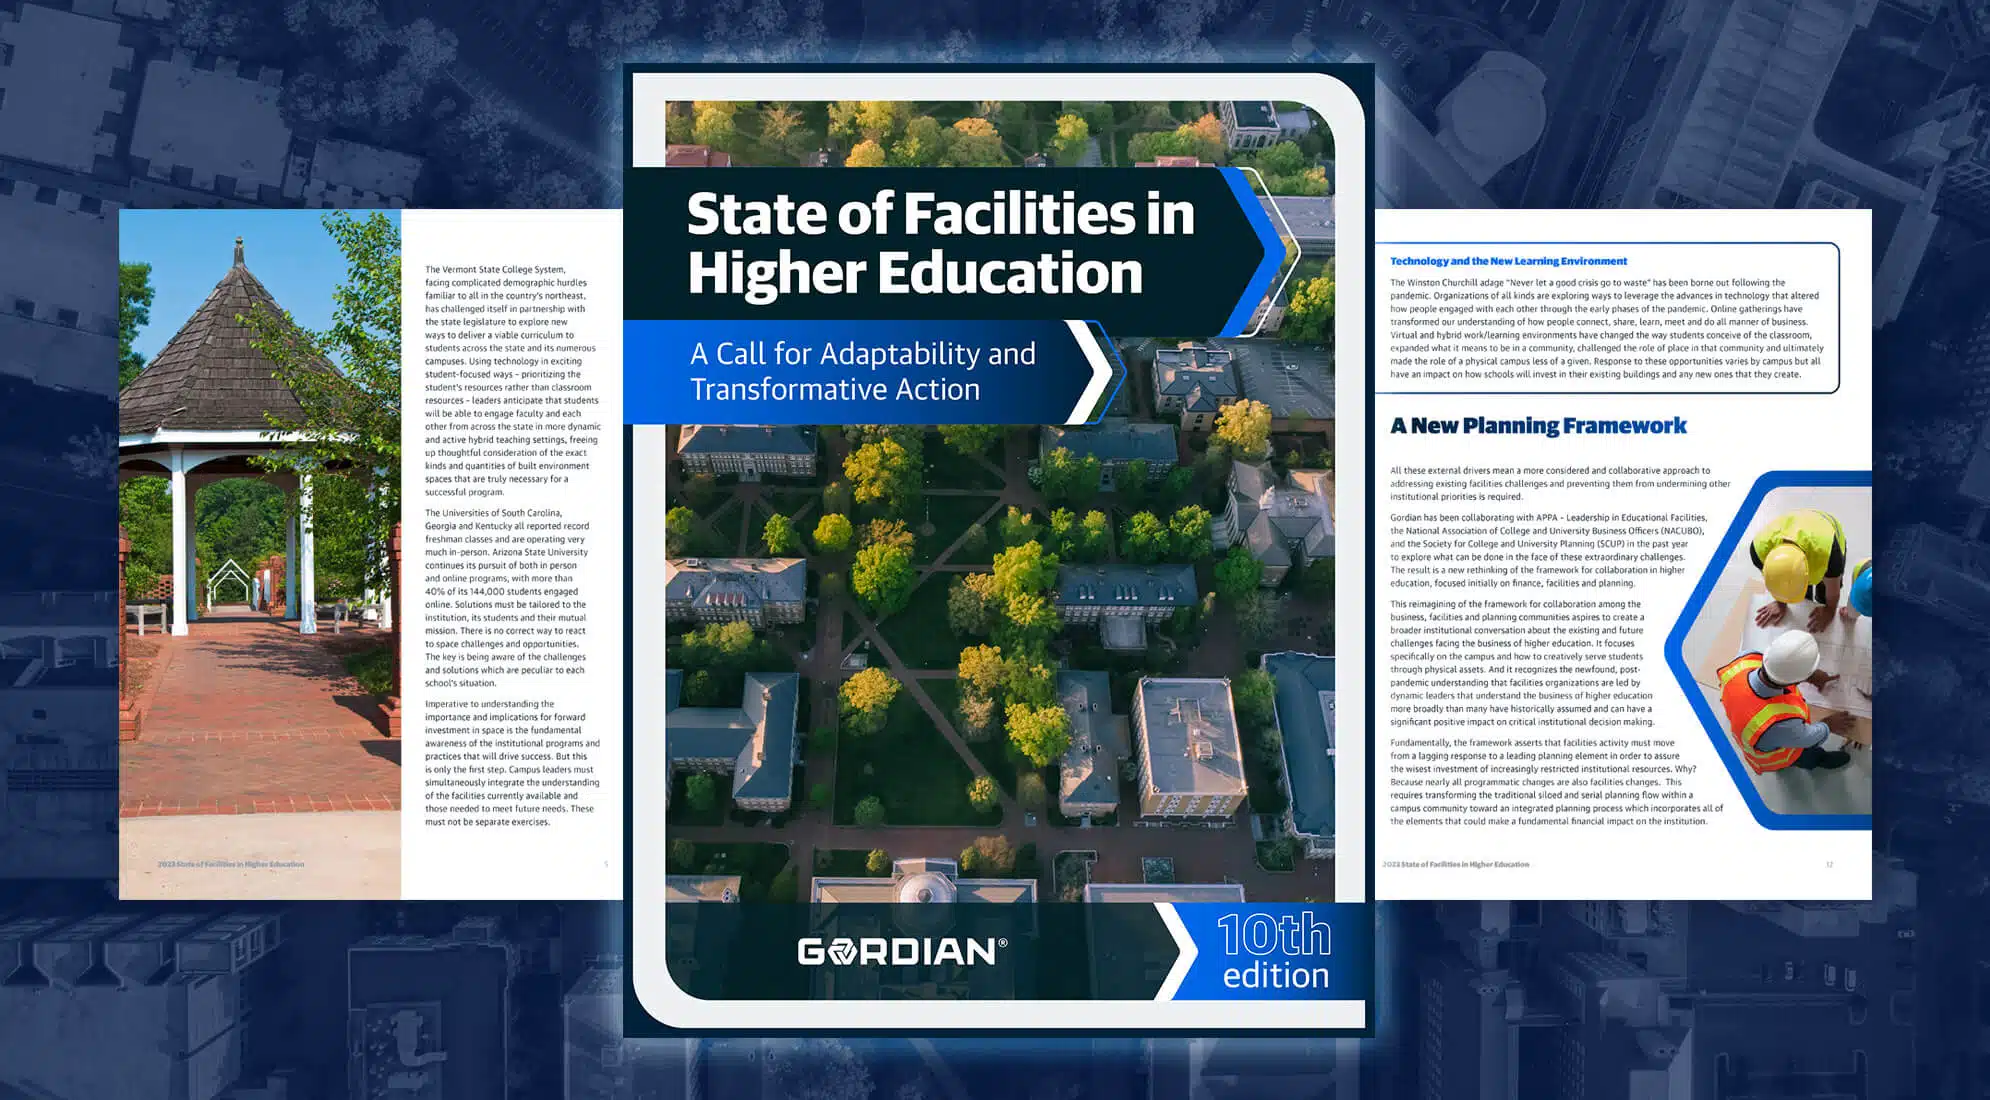 The State of Facilities in Higher Education, 10th Edition 2